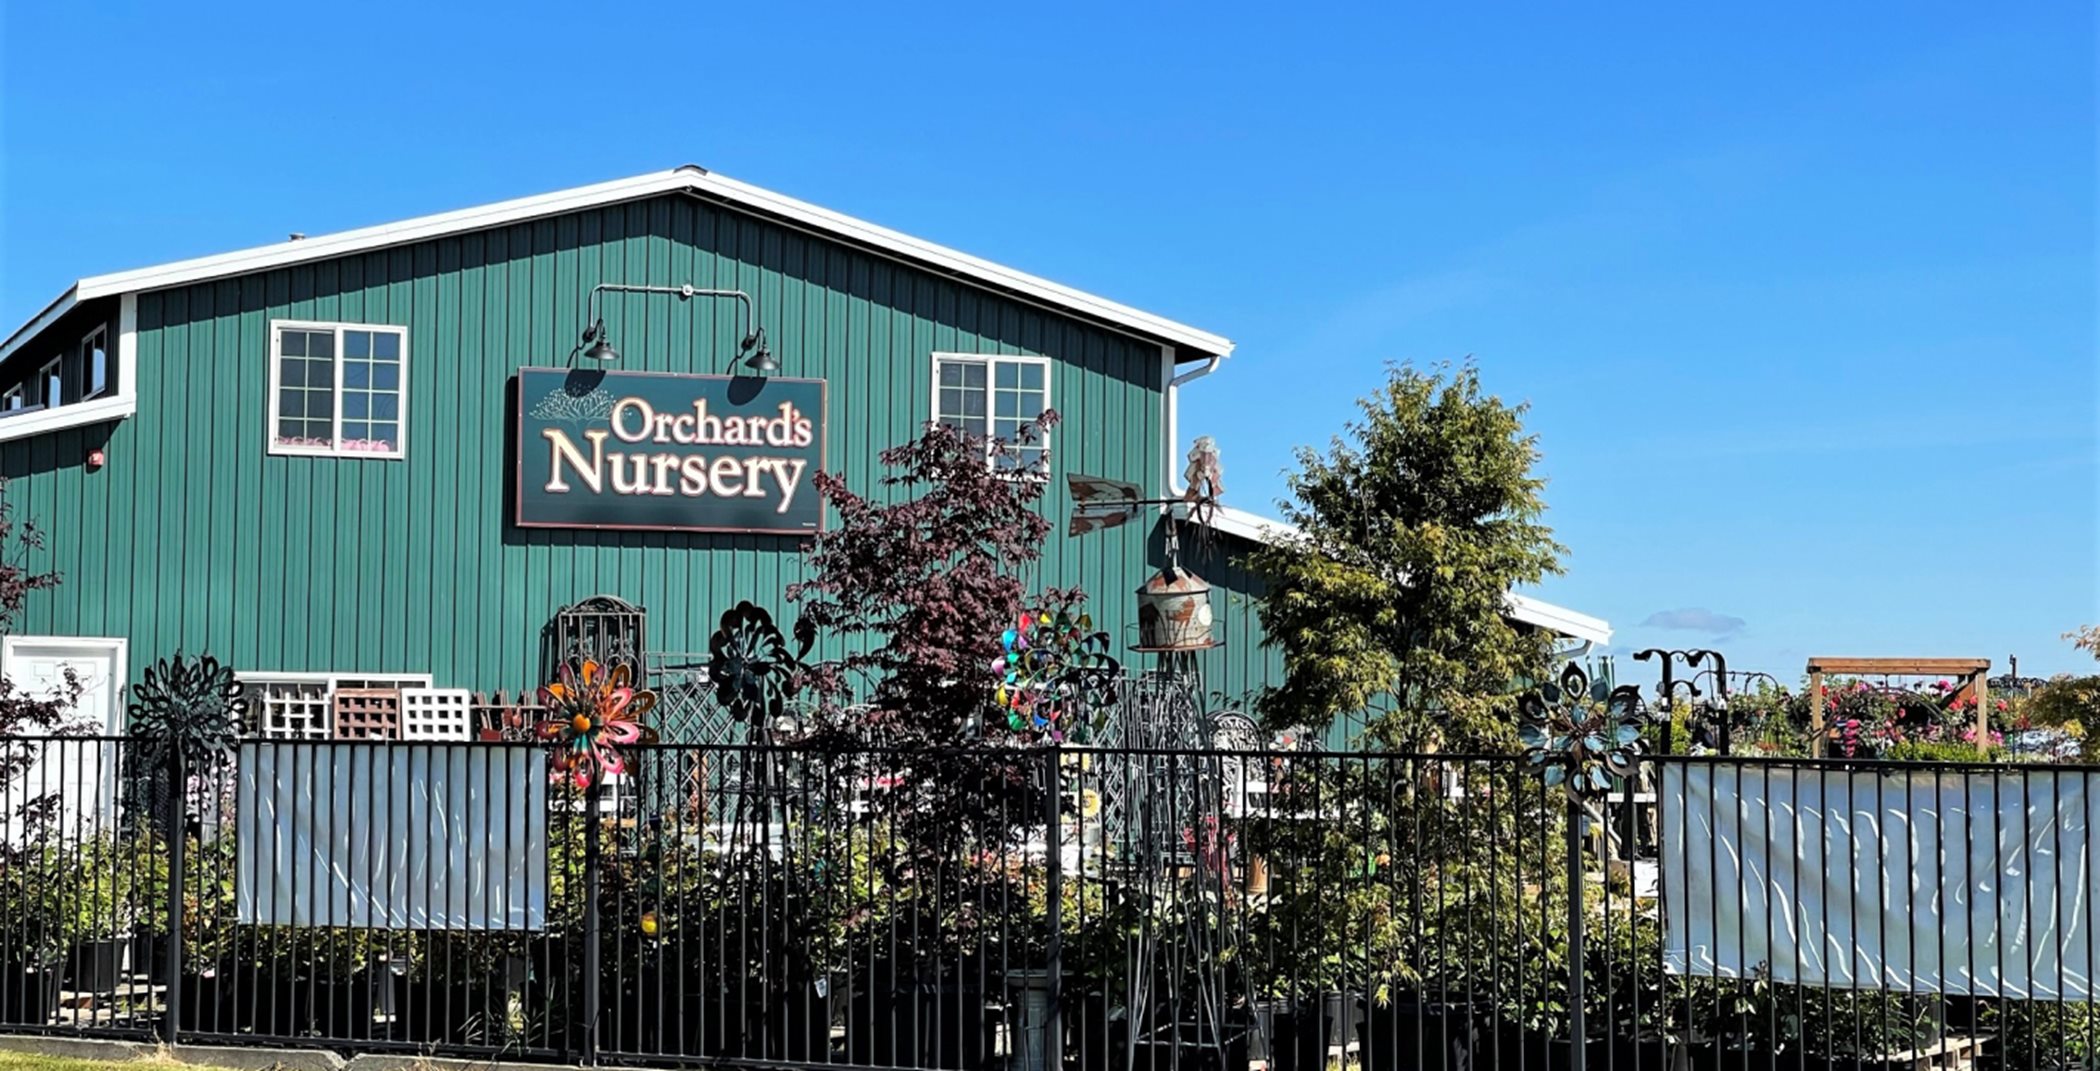 Orchard's Nursery Building. It is green and resembles a house.